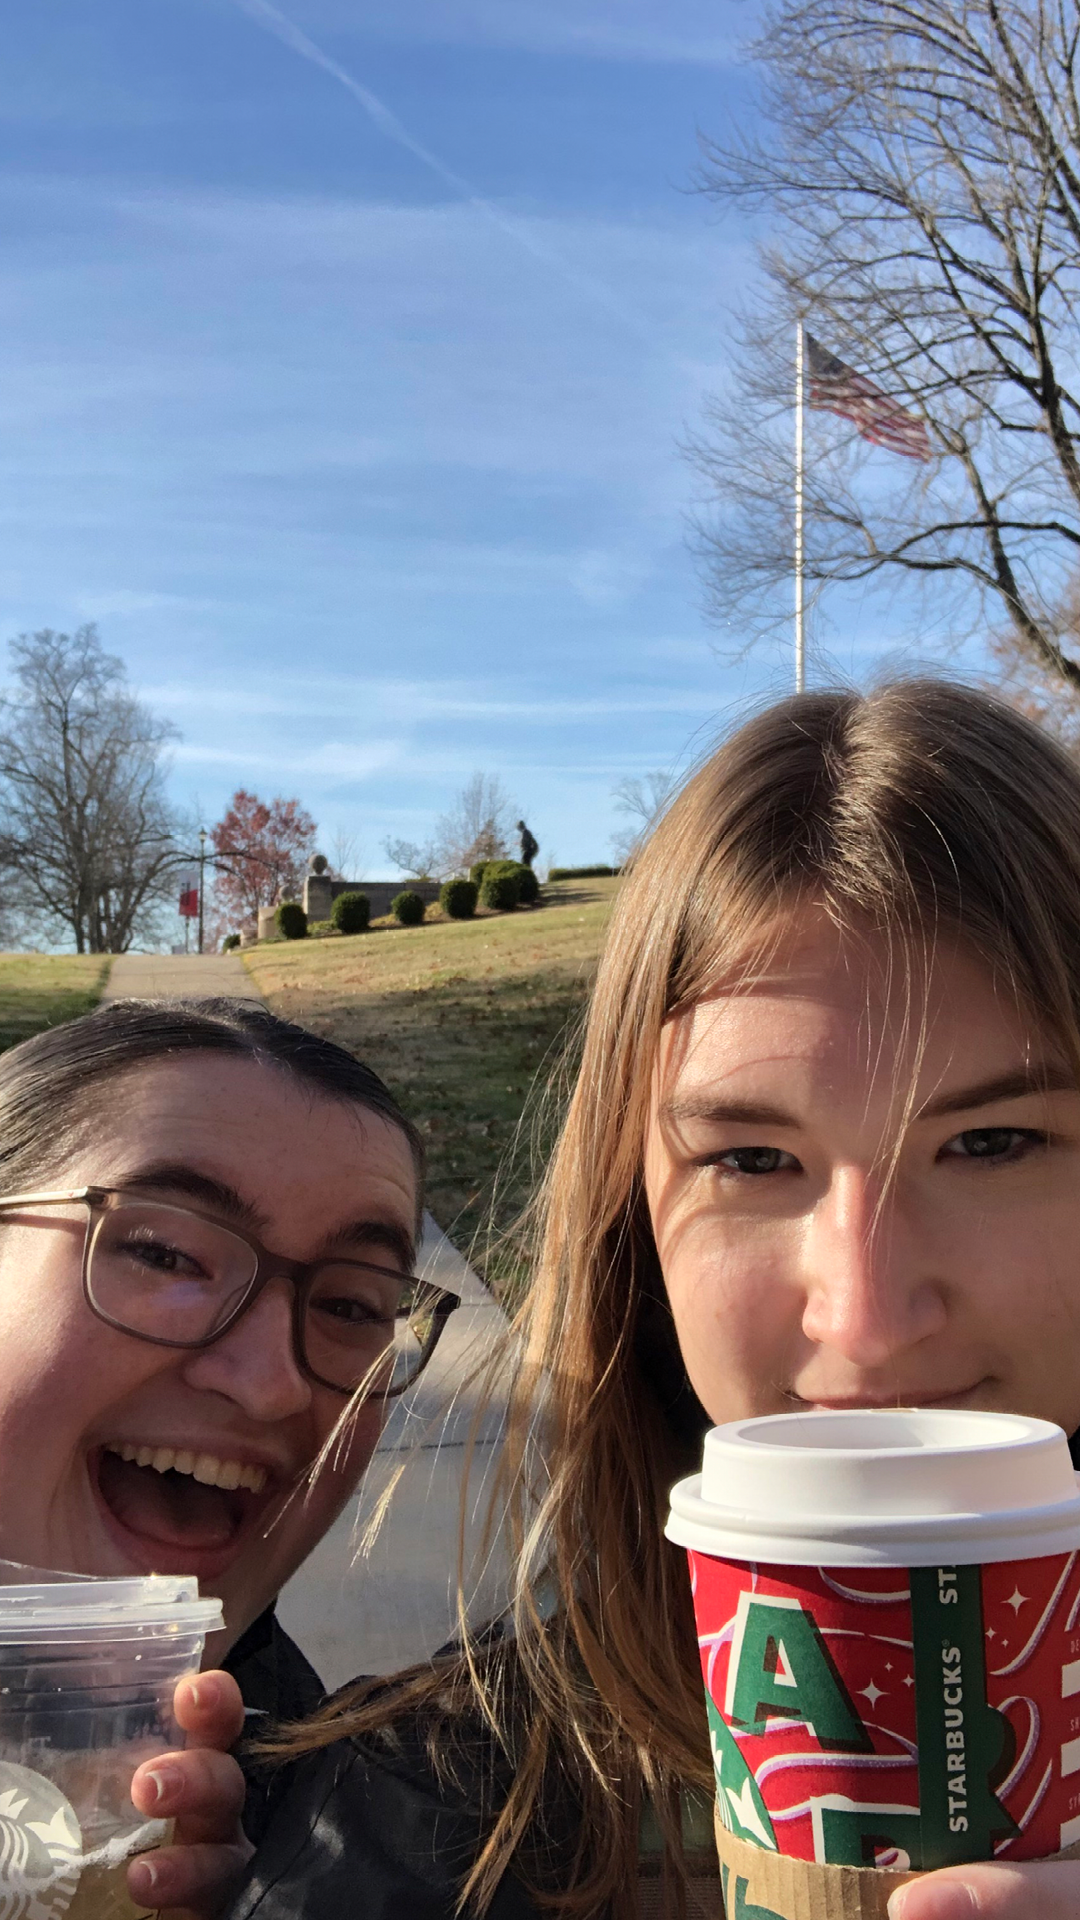 Isabel and a friend taking a selfie holding Starbucks coffee